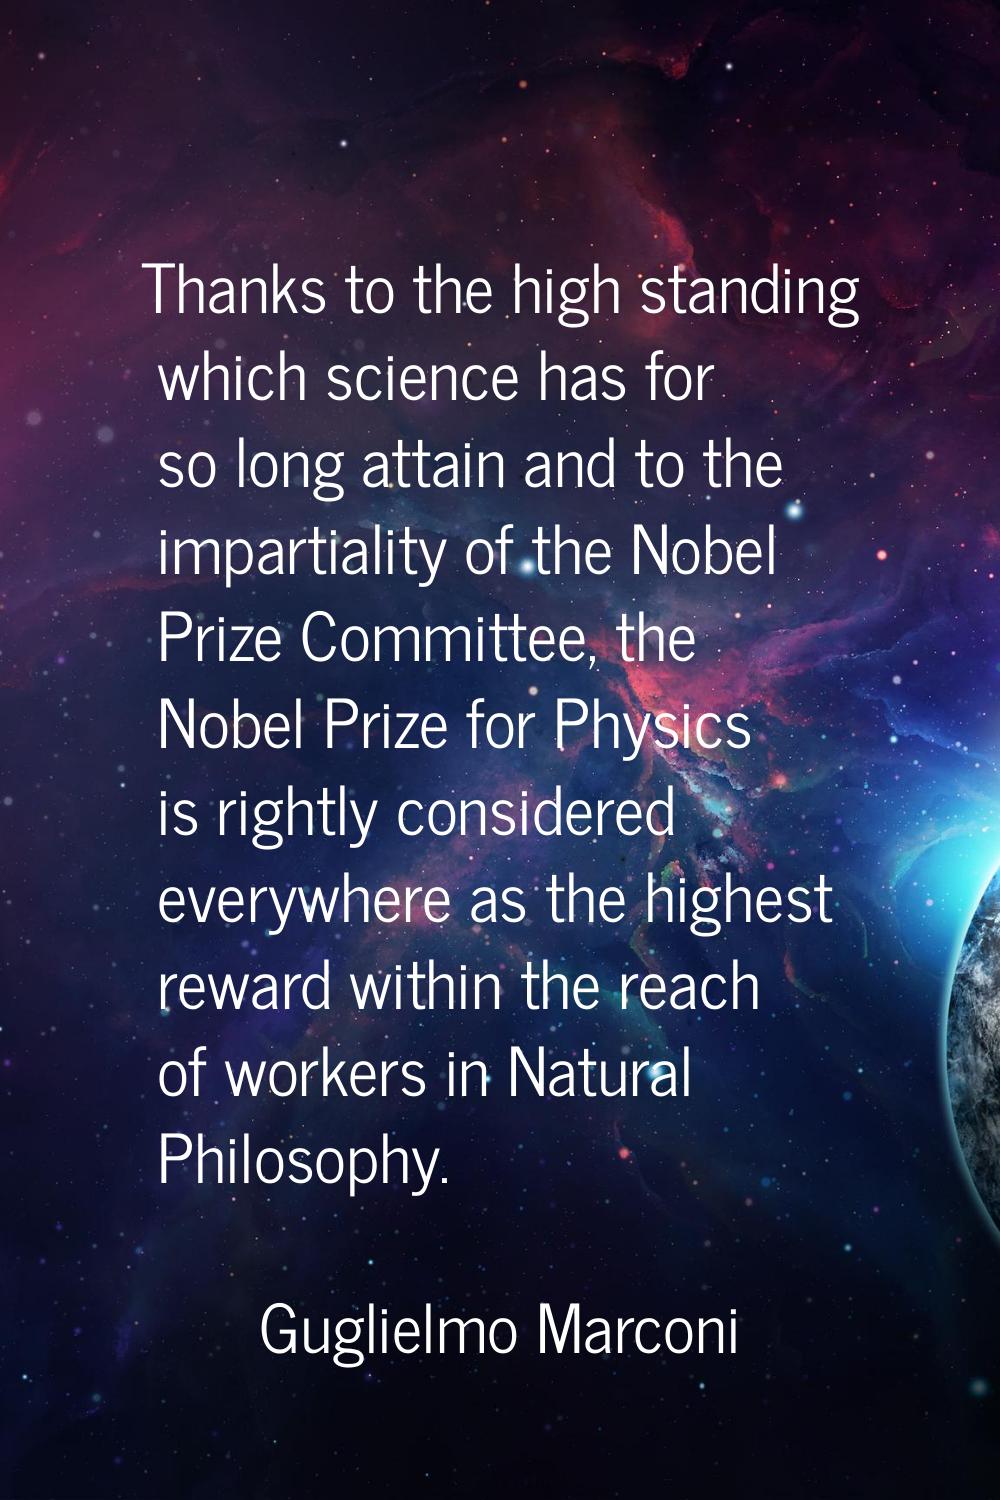 Thanks to the high standing which science has for so long attain and to the impartiality of the Nob